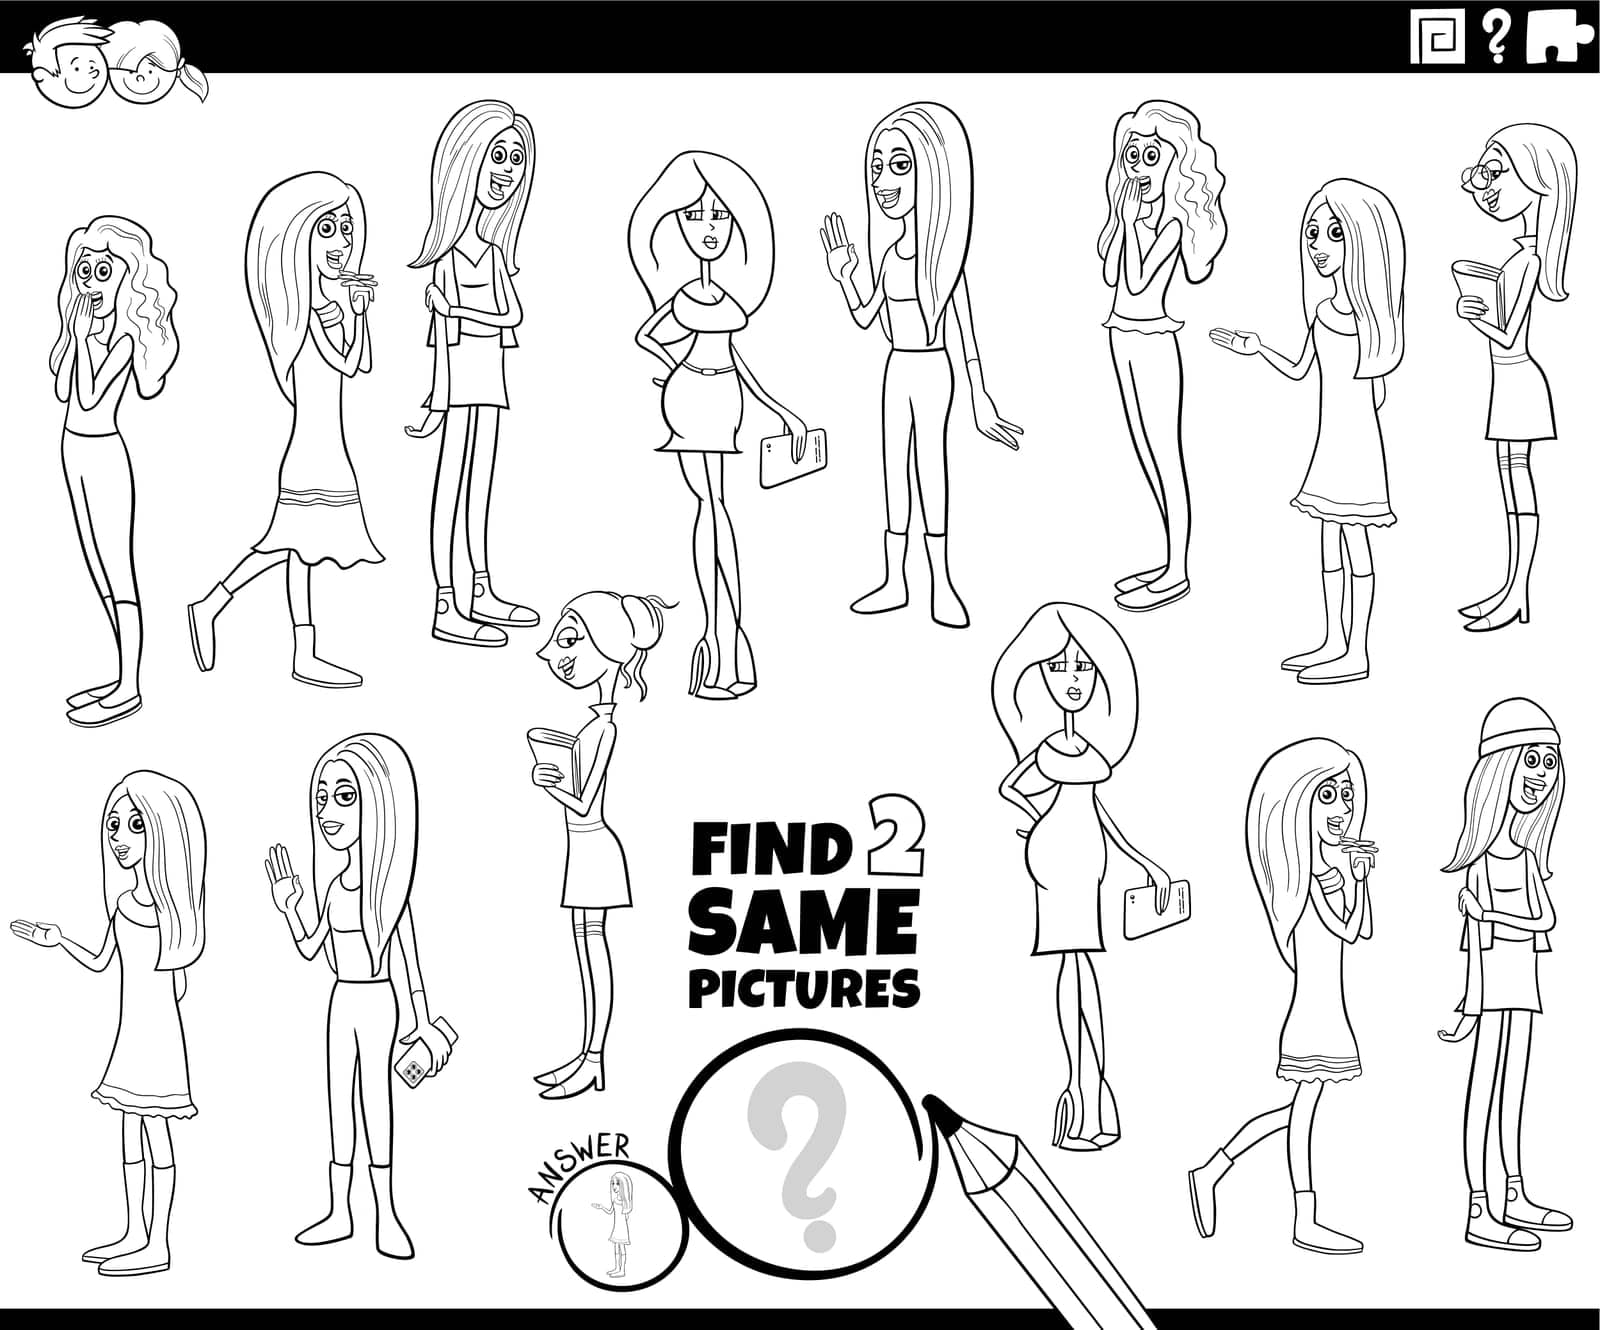 Cartoon illustration of finding two same pictures educational activity with girls or young women characters coloring page